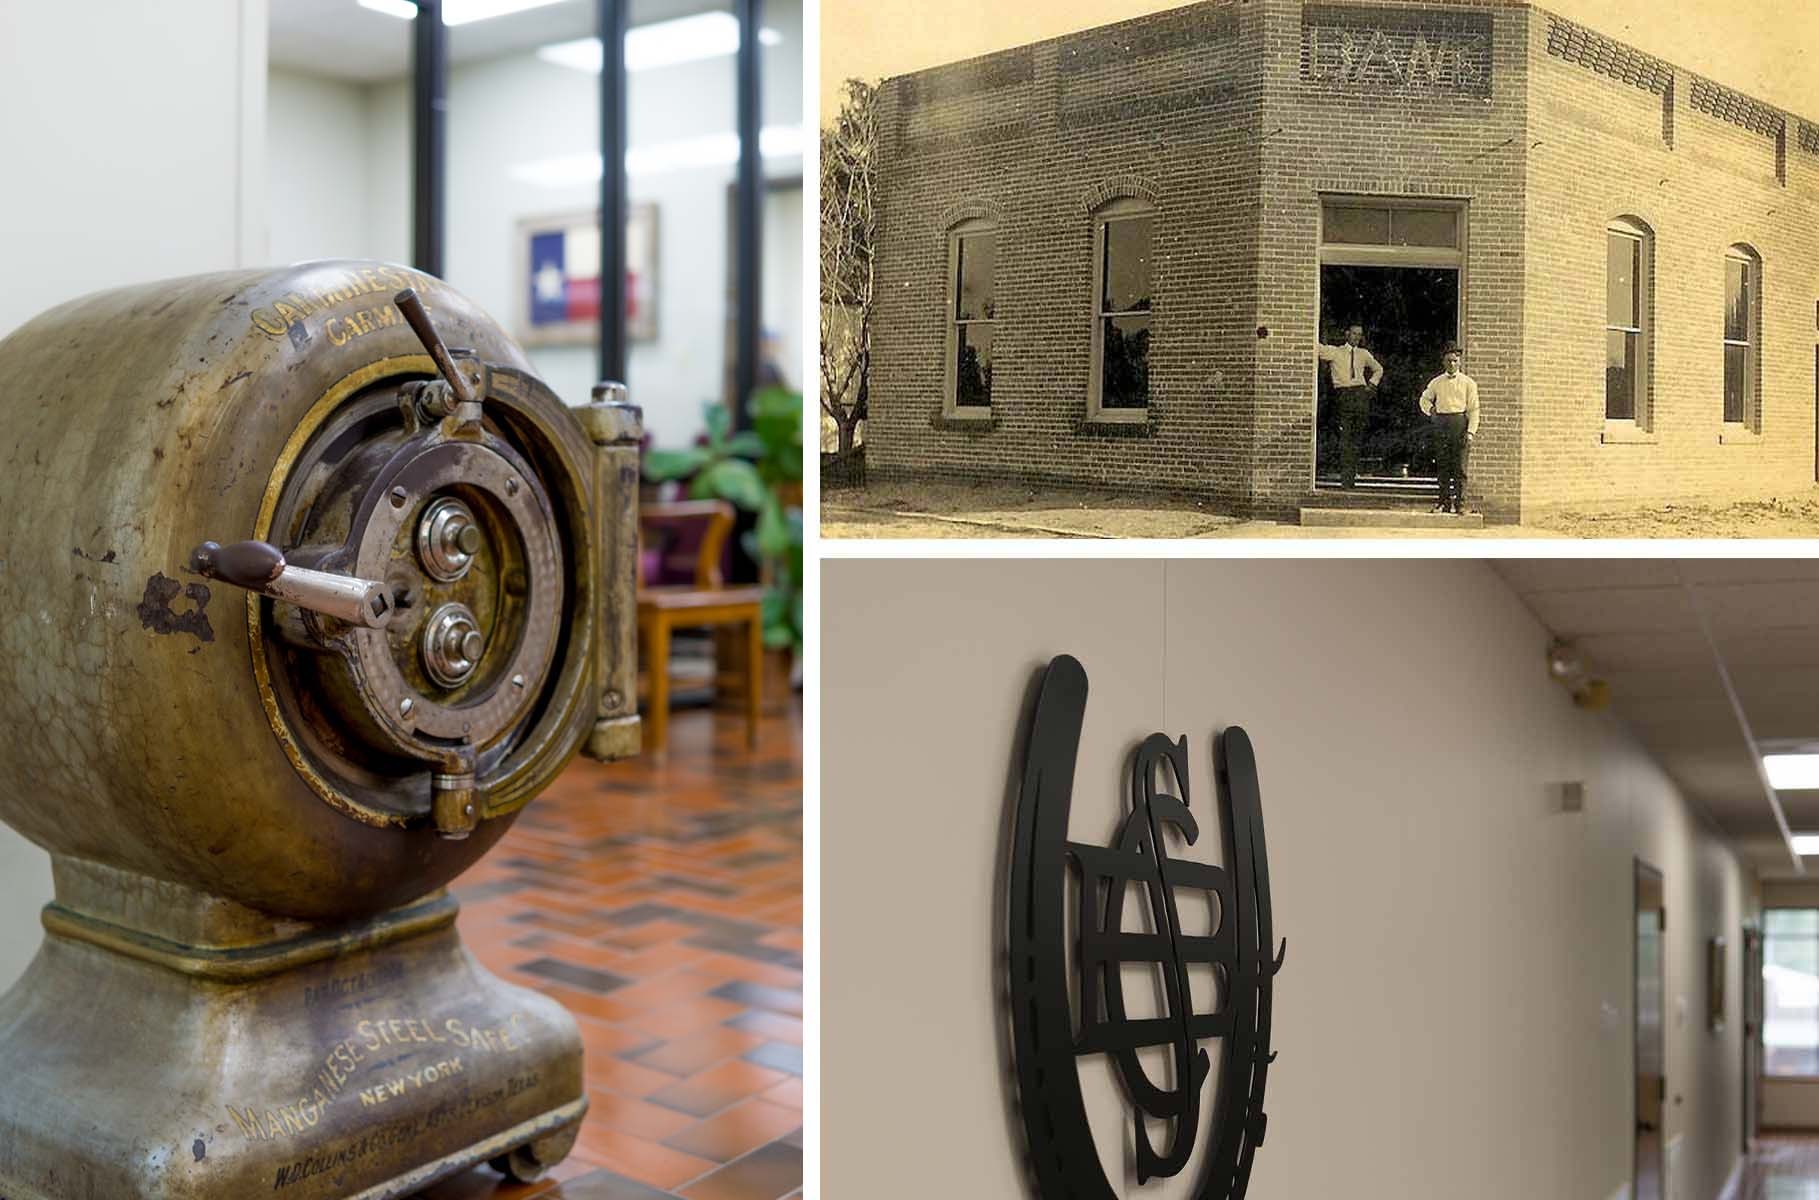 Graphic that shows images of historic Carmine State Bank buildings and artifacts